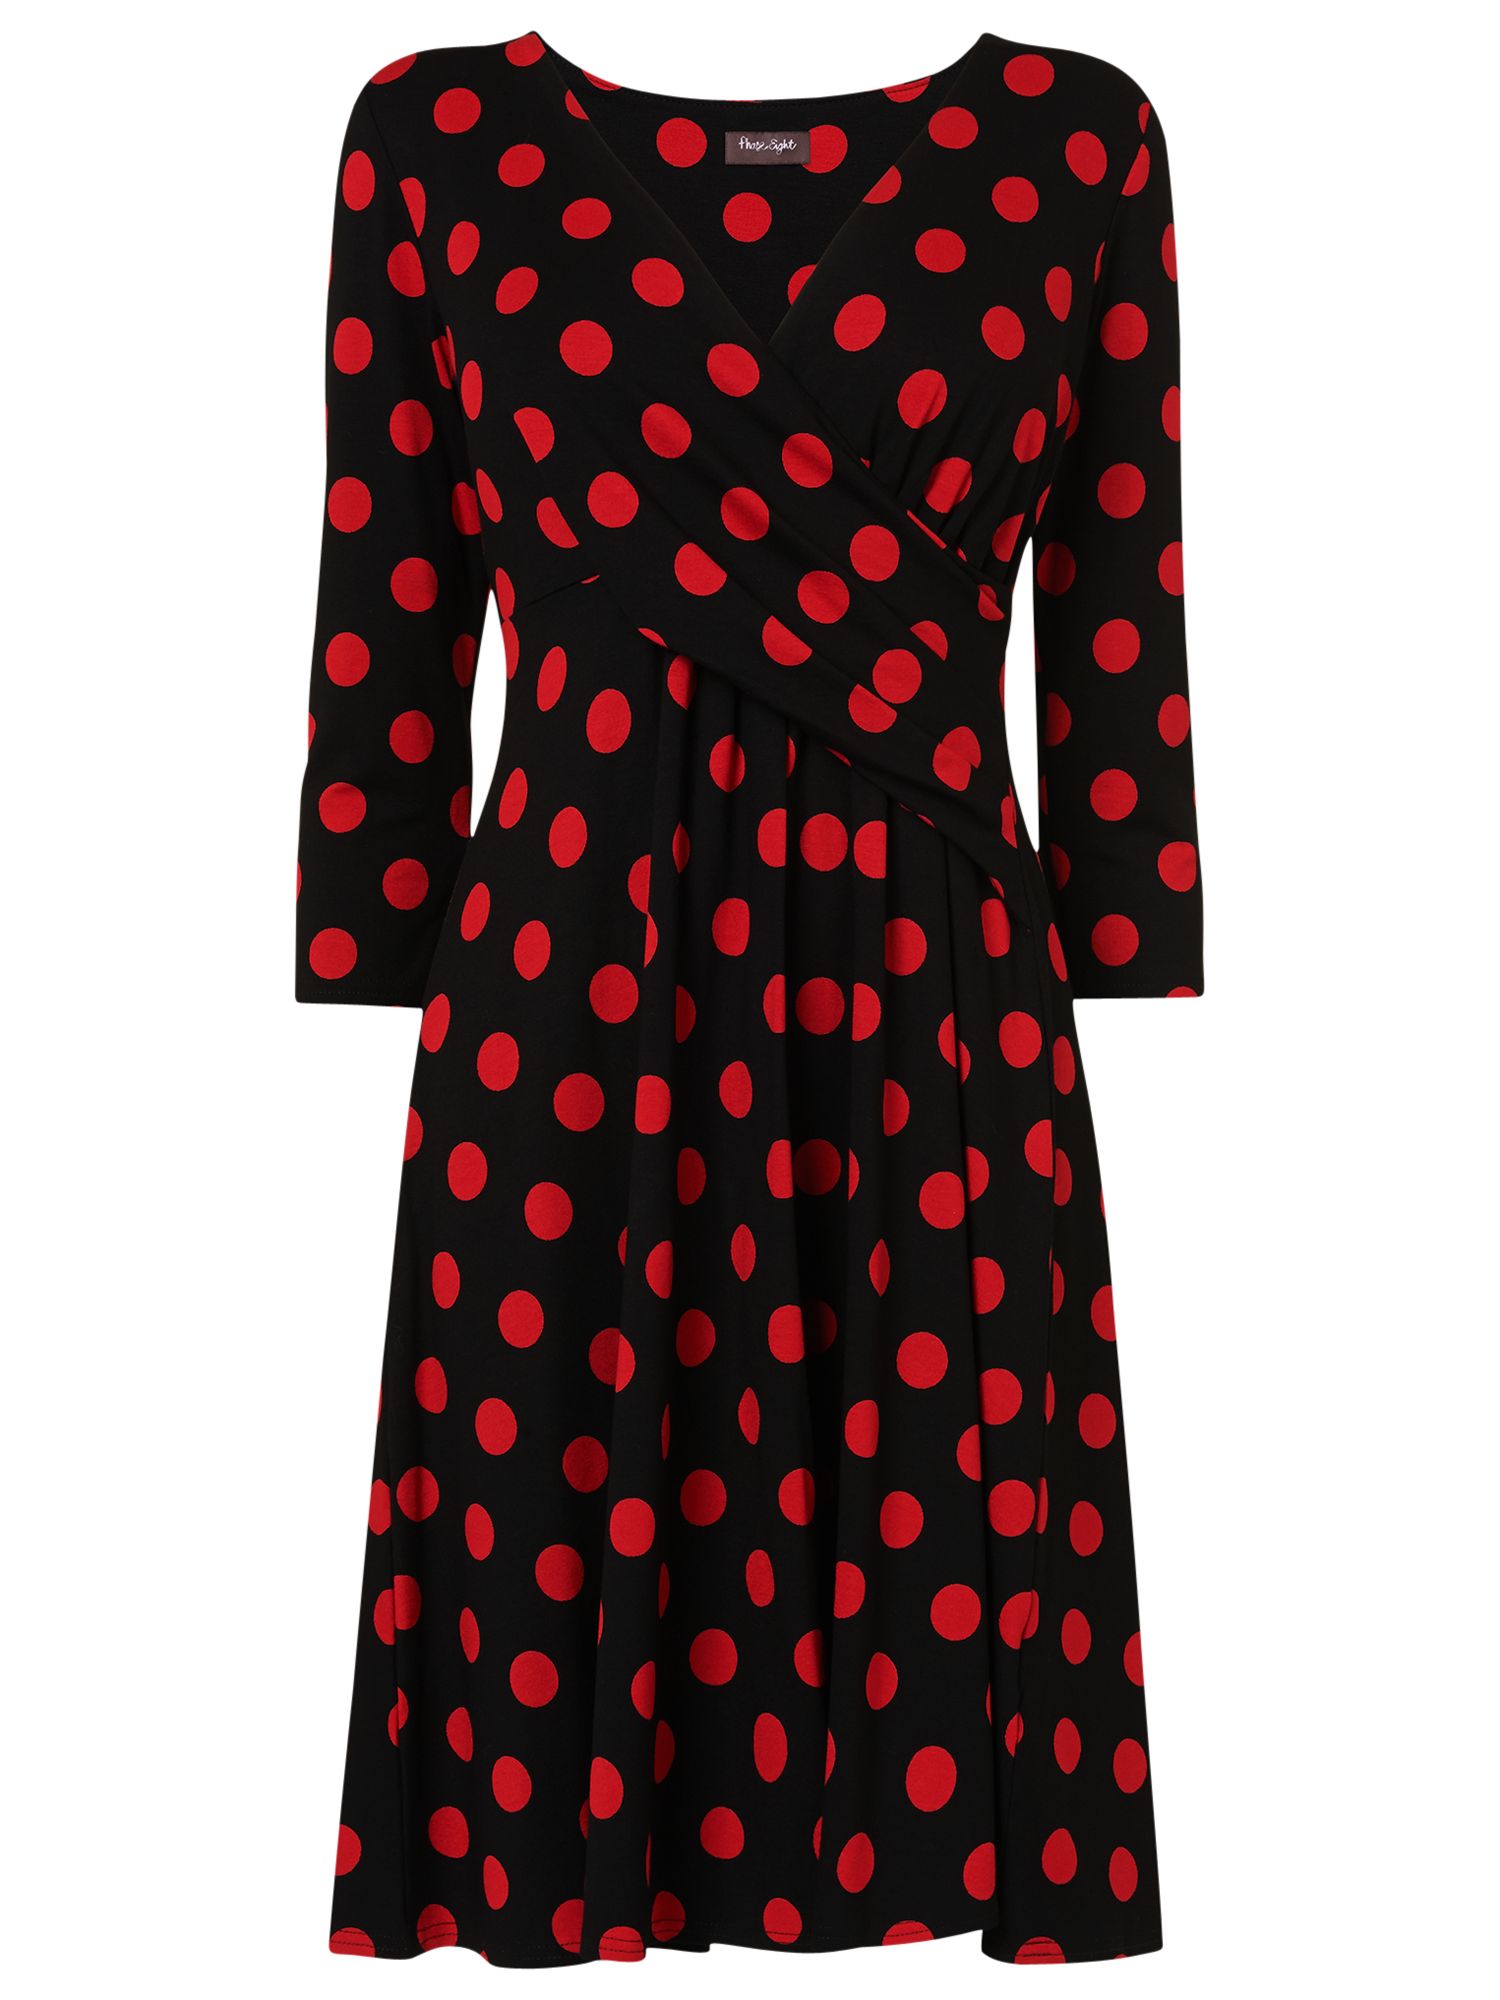 red dress with black dots